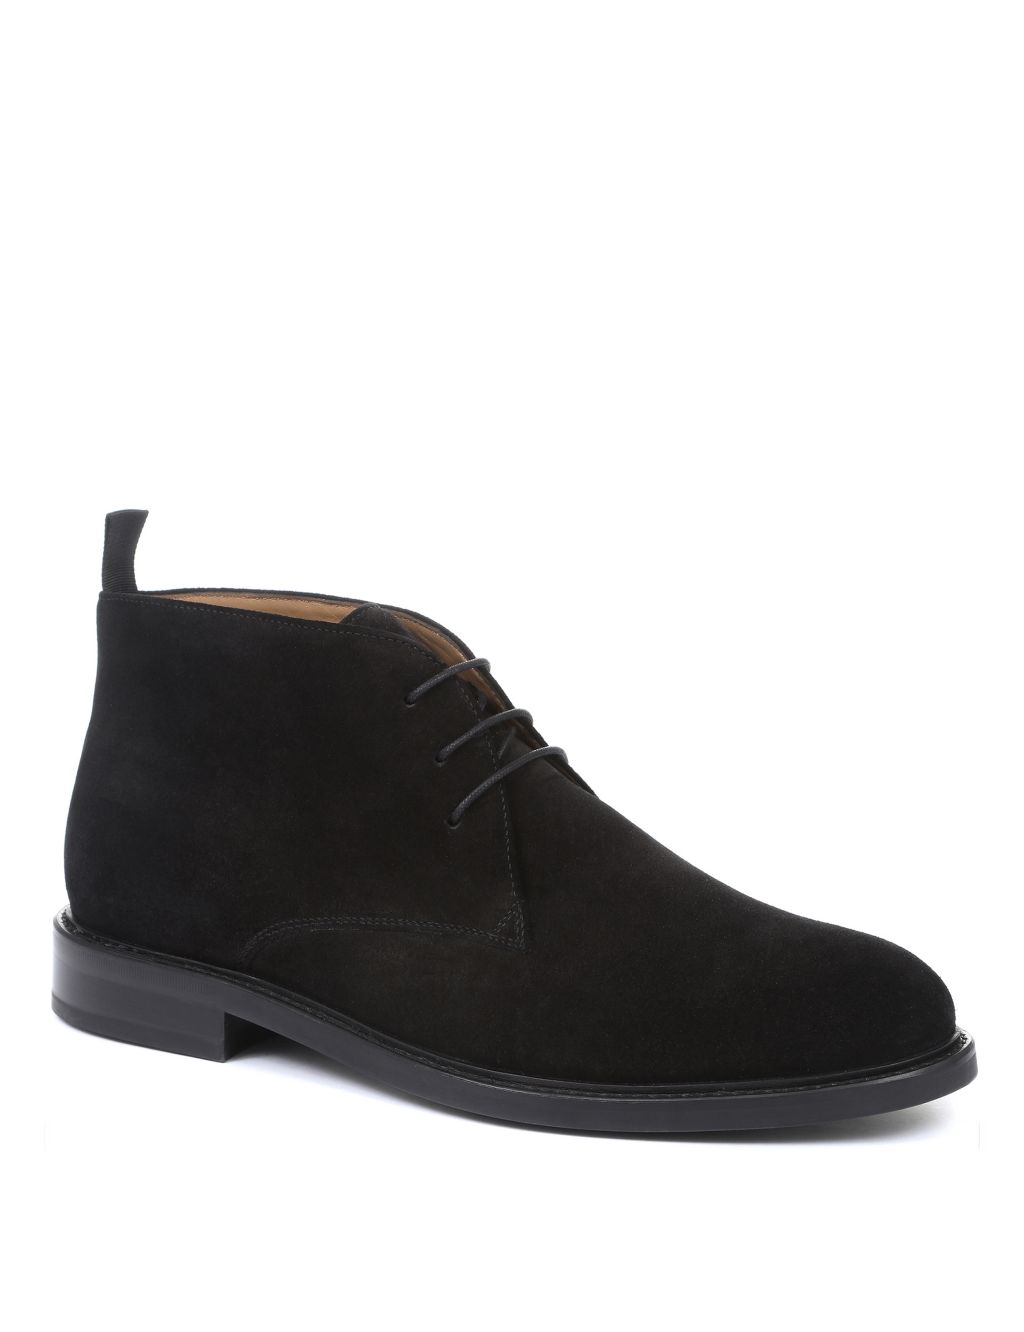 Suede Pull-on Chukka Boots image 2